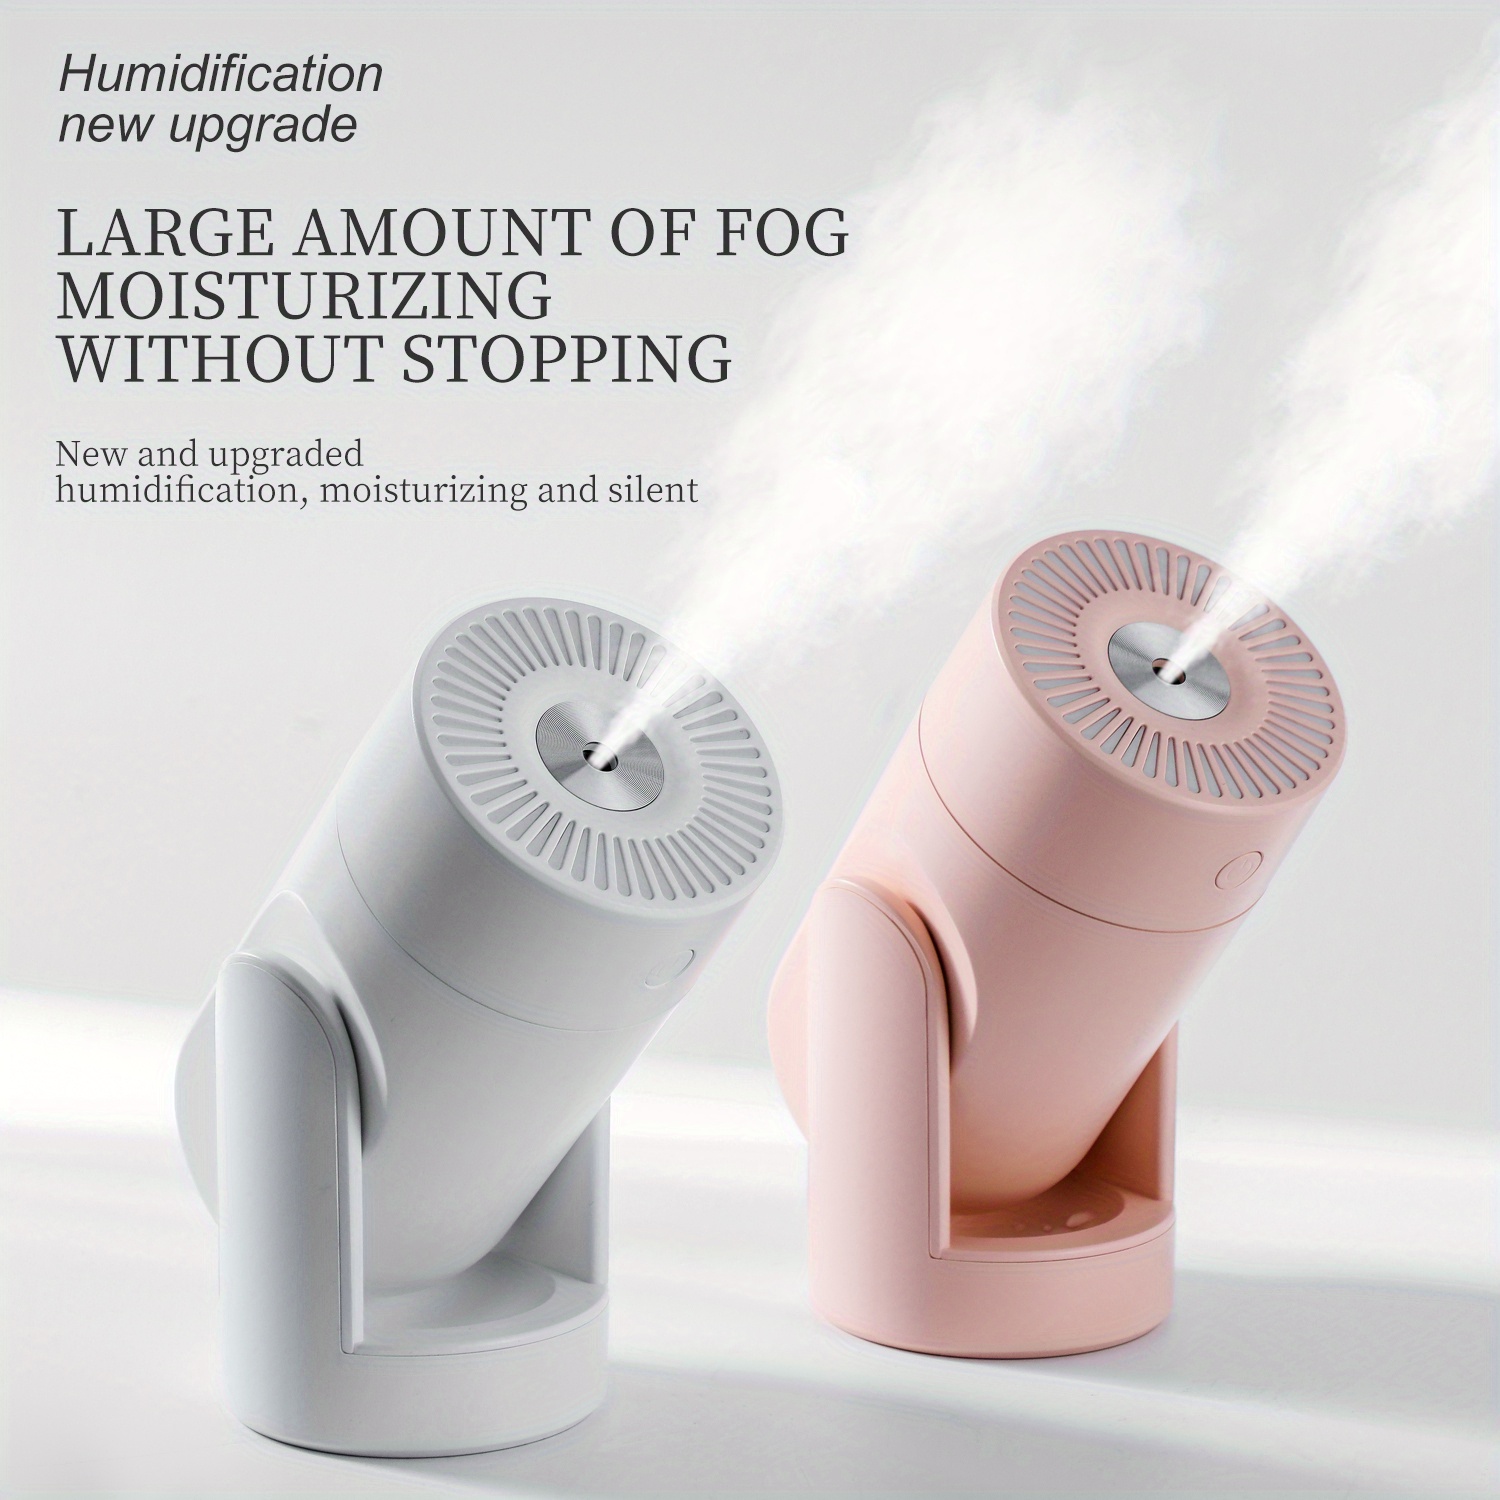 1pc 220ml adjustable angle shakable head humidifier 2 mist modes usb personal desktop humidifier for home office or yoga essential oil diffuser with no water auto off protection seven color light switch at will pink black white details 10